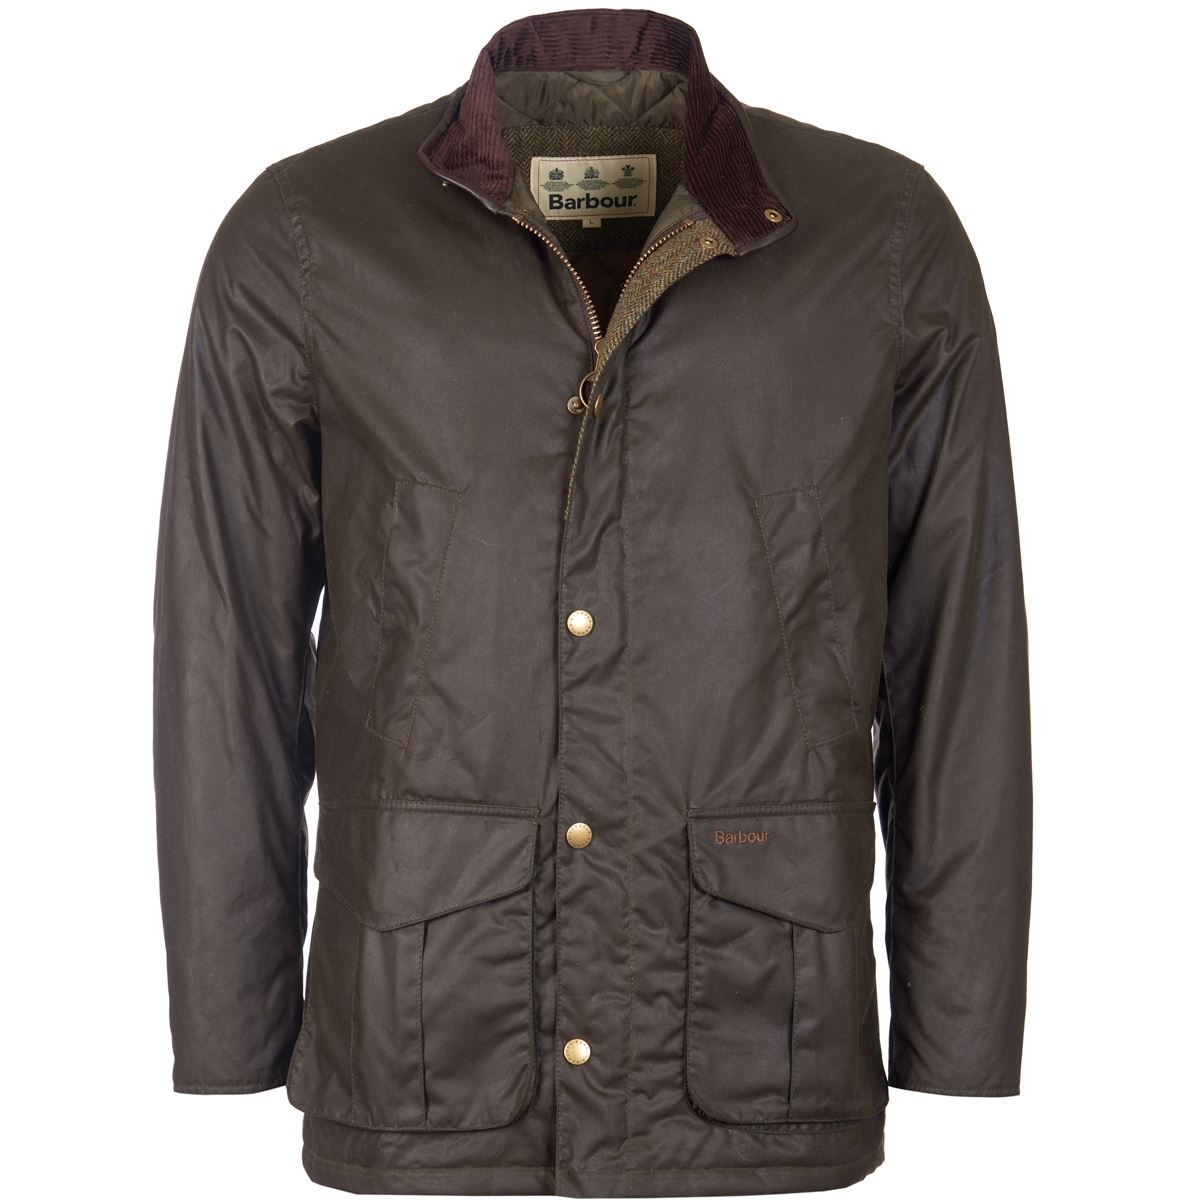 What are the features of the Barbour Hereford jacket?